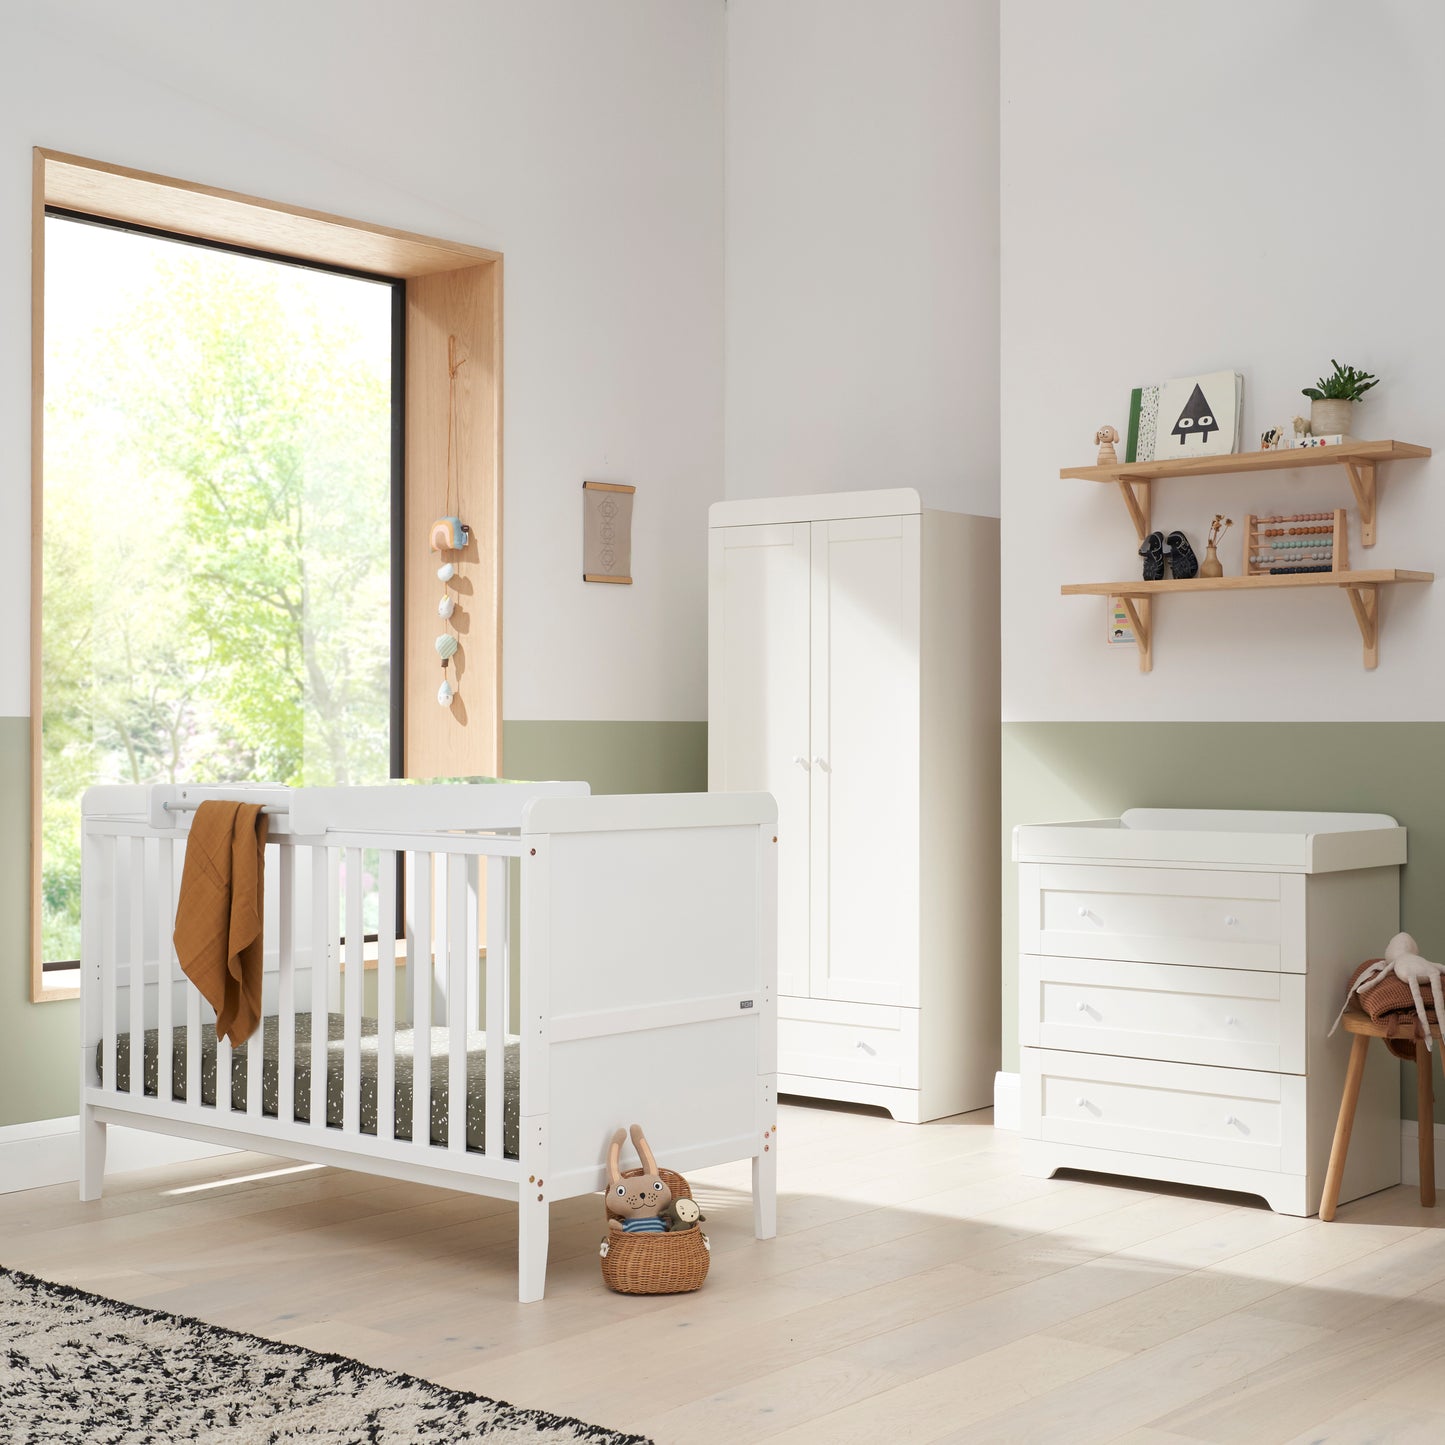 Tutti Bambini Rio 3 Piece Range with Cot Bed, Dresser Changer and Wardrobe